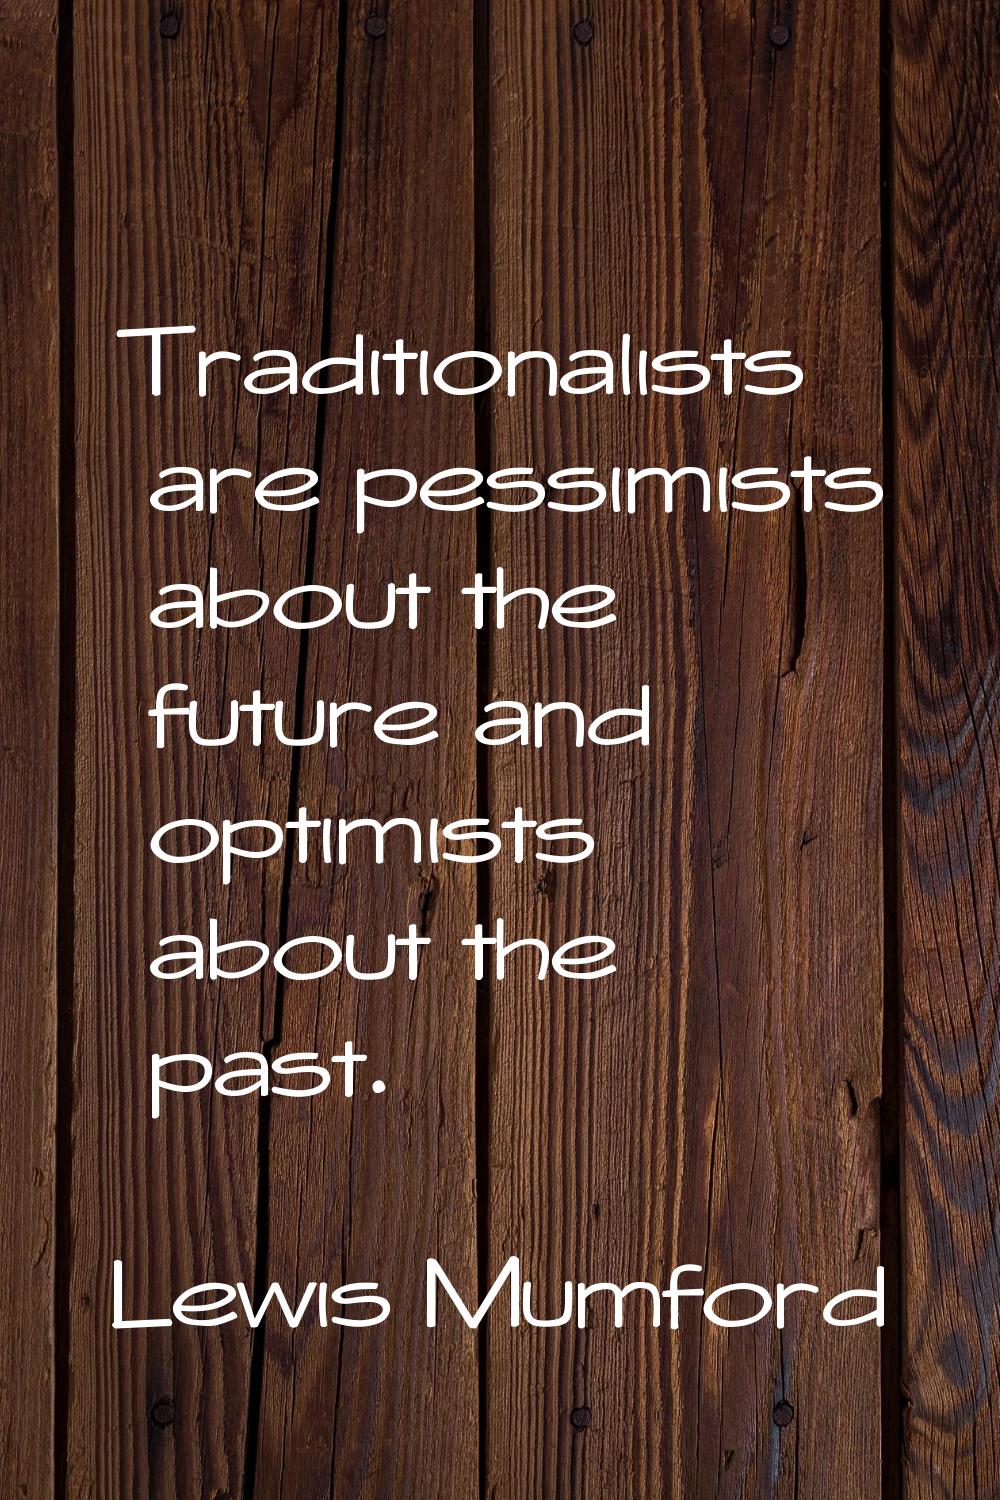 Traditionalists are pessimists about the future and optimists about the past.